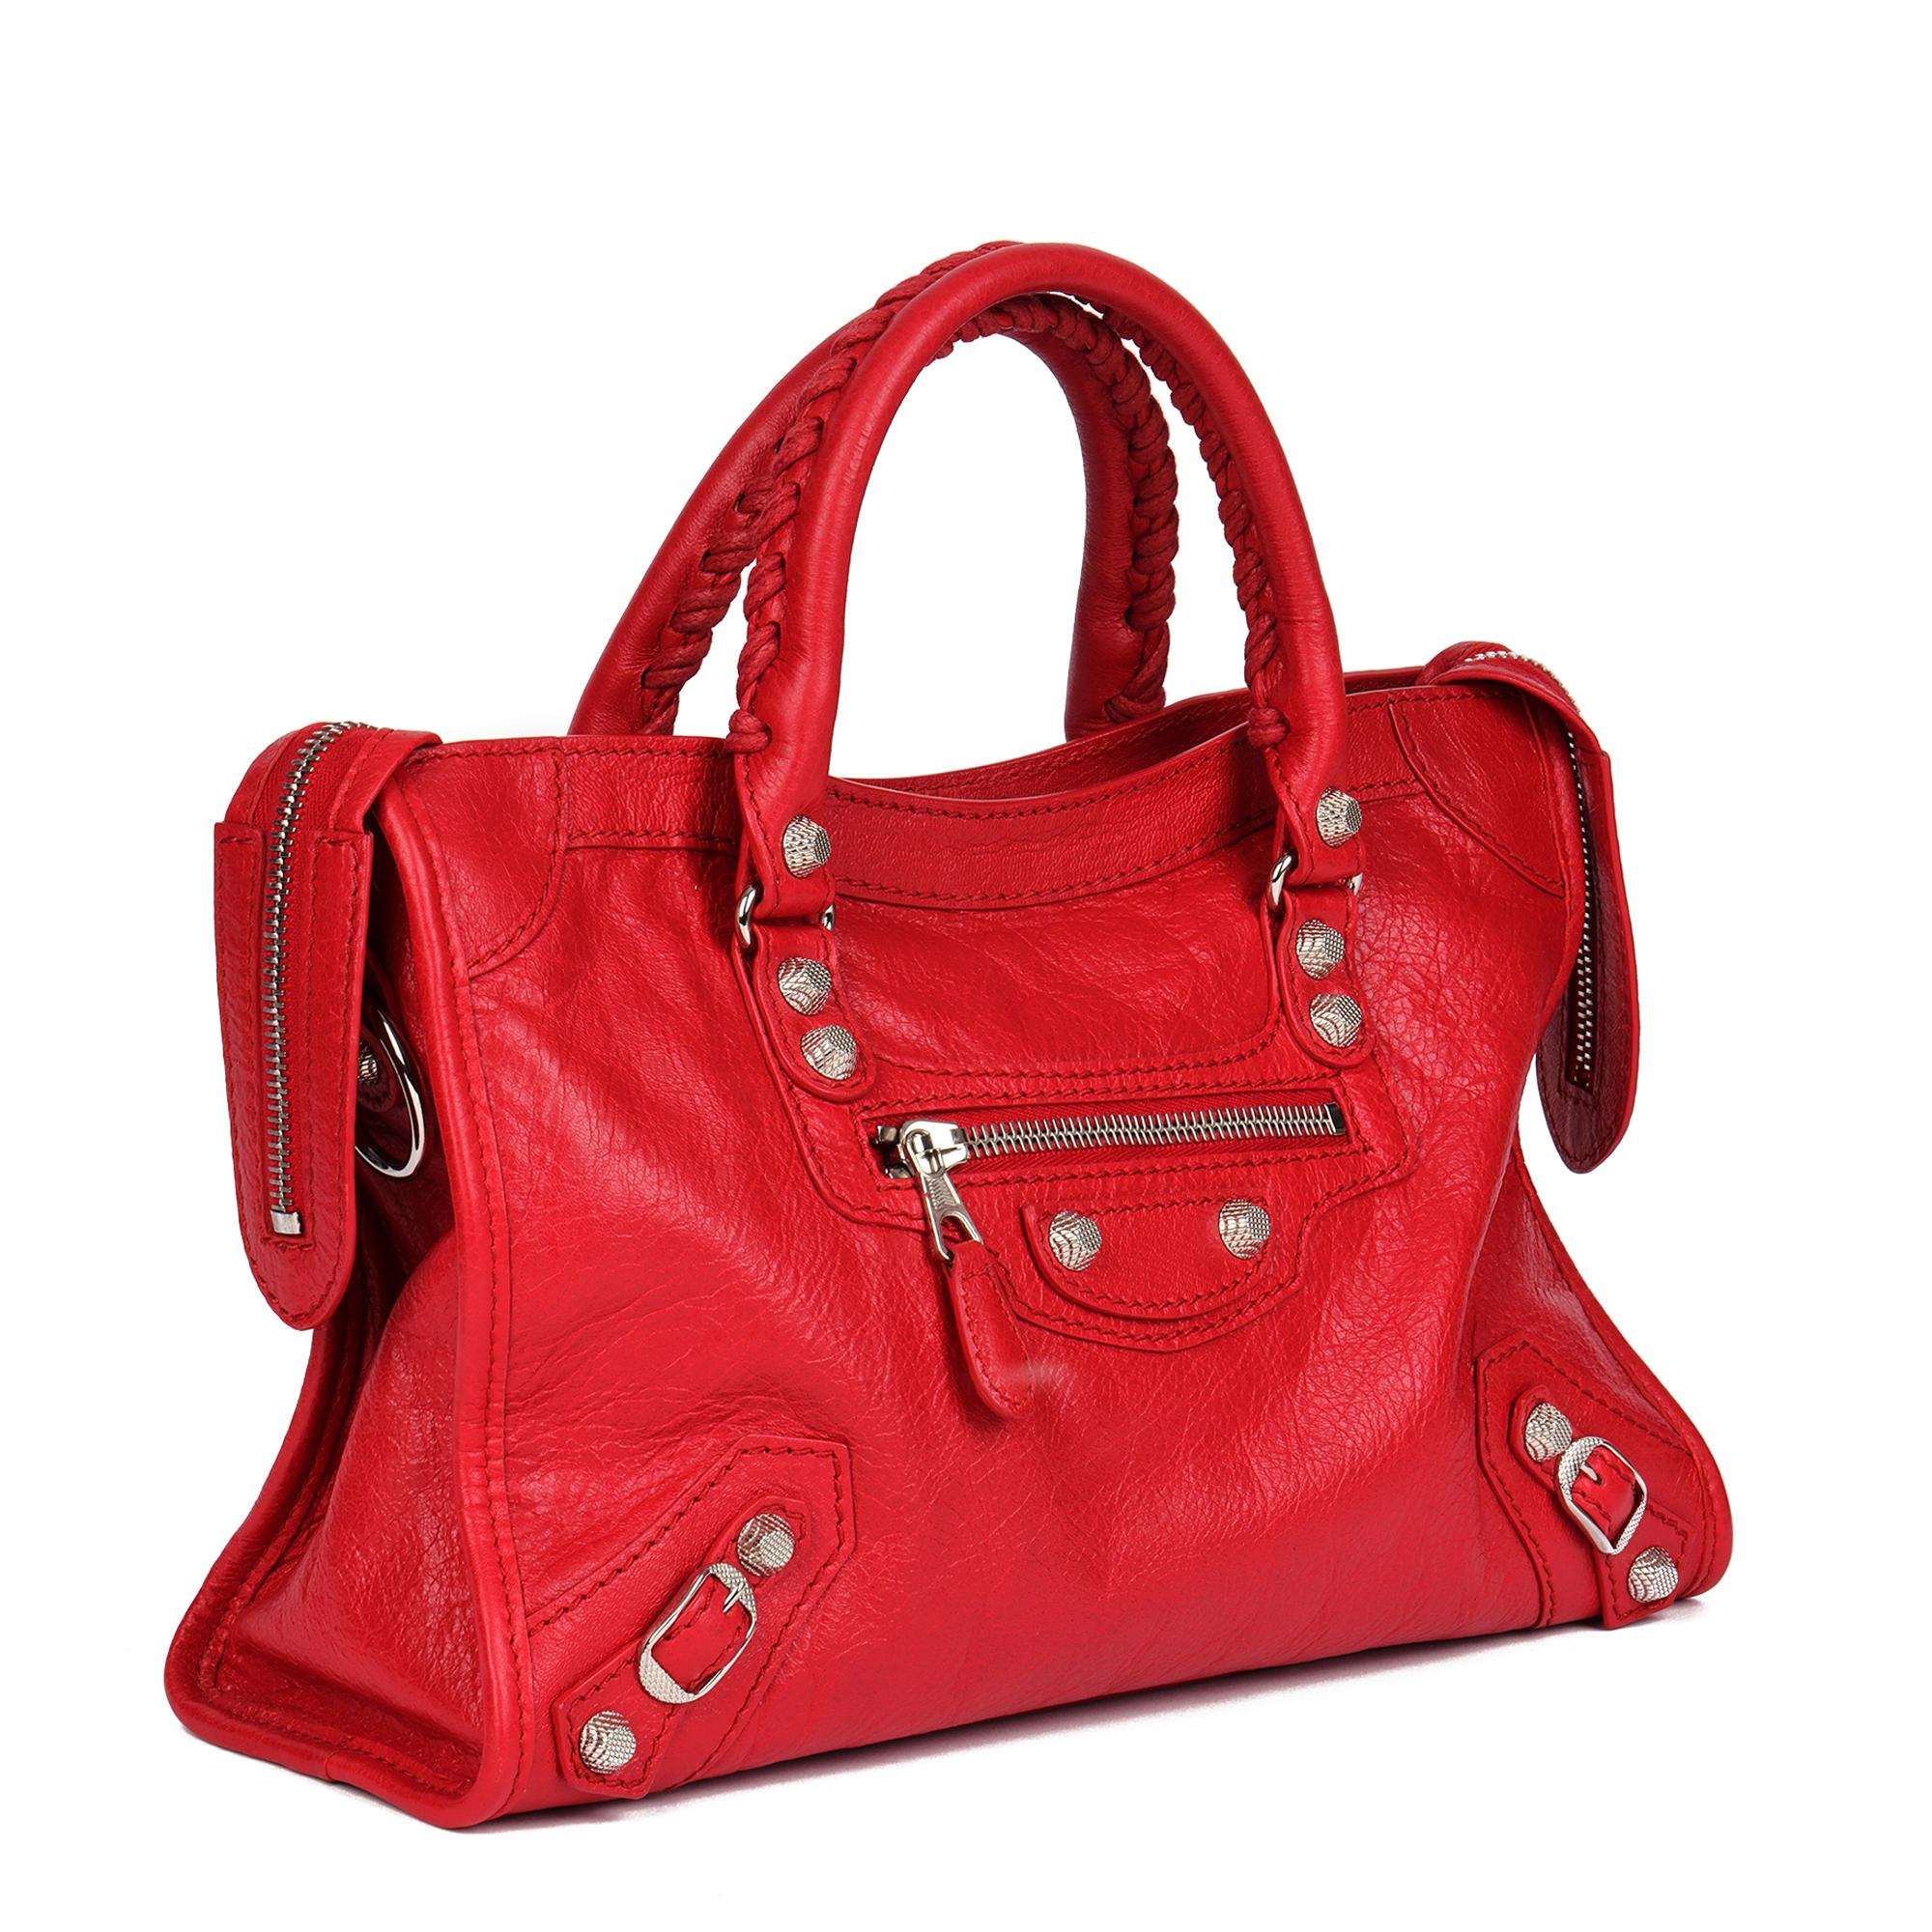 BALENCIAGA
Red Aged Lambskin Small City Bag

Serial Number: 542022.6420.Z.528147.O
Age (Circa): 2005
Accompanied By: Balenciaga Dust Bag, Care Booklet, Shoulder Strap 
Authenticity Details: Date Stamp (Made in Italy)
Gender: Ladies
Type: Tote,